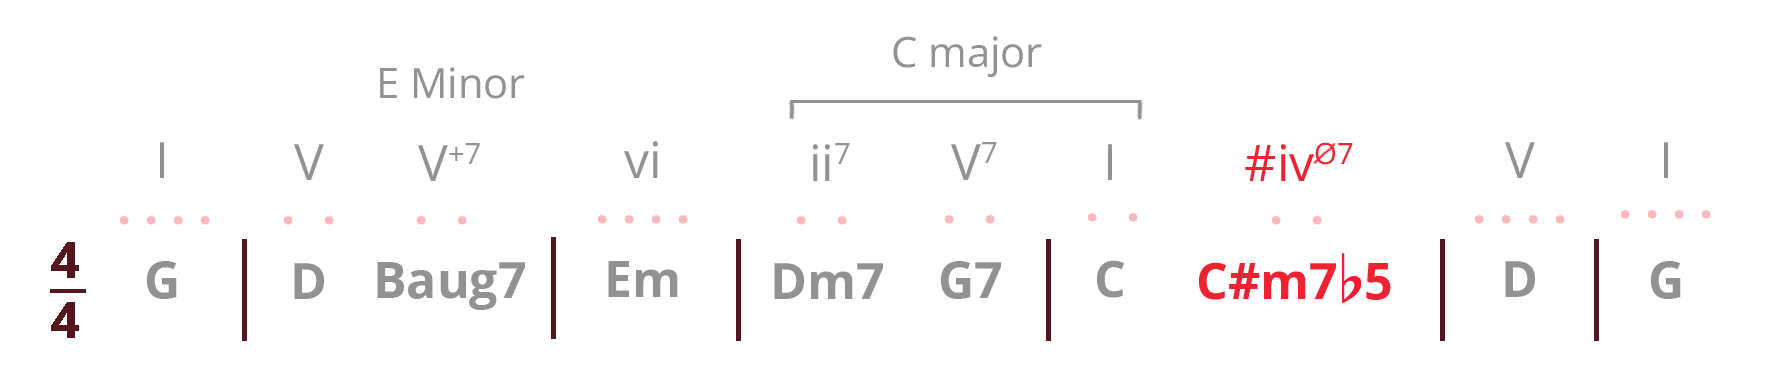 Gospel piano chord progression with added C#m7b5 in red.